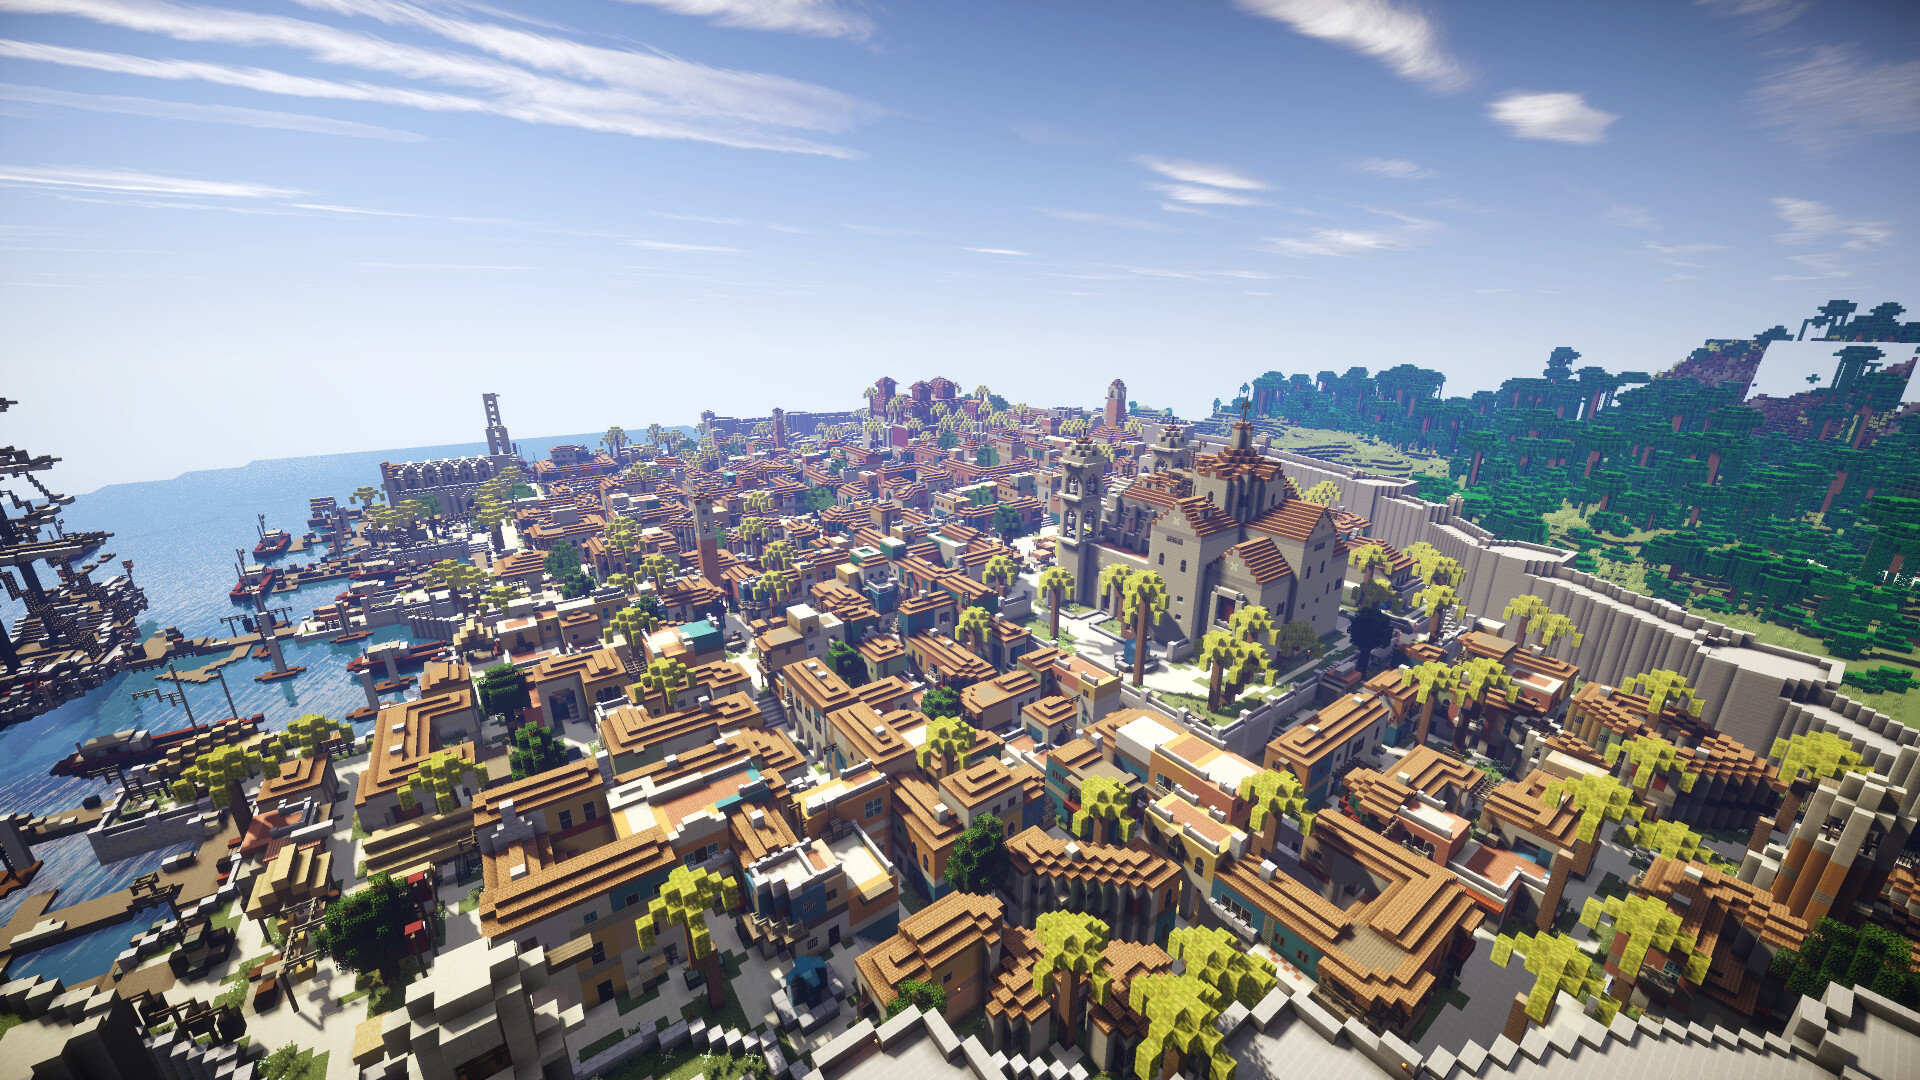 Havana From Assassin’s Creed IV, Recreated In Minecraft